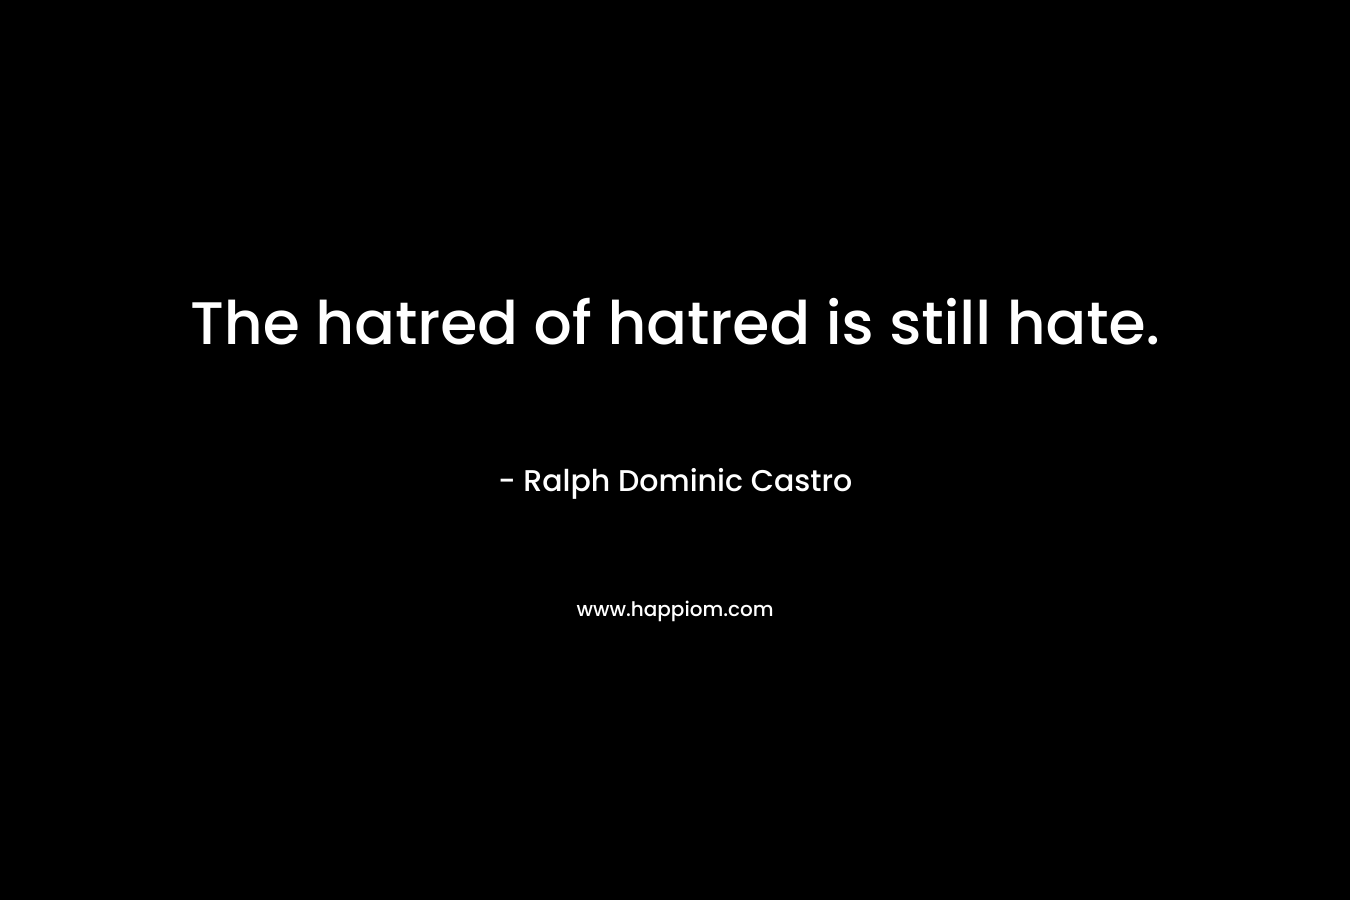 The hatred of hatred is still hate.